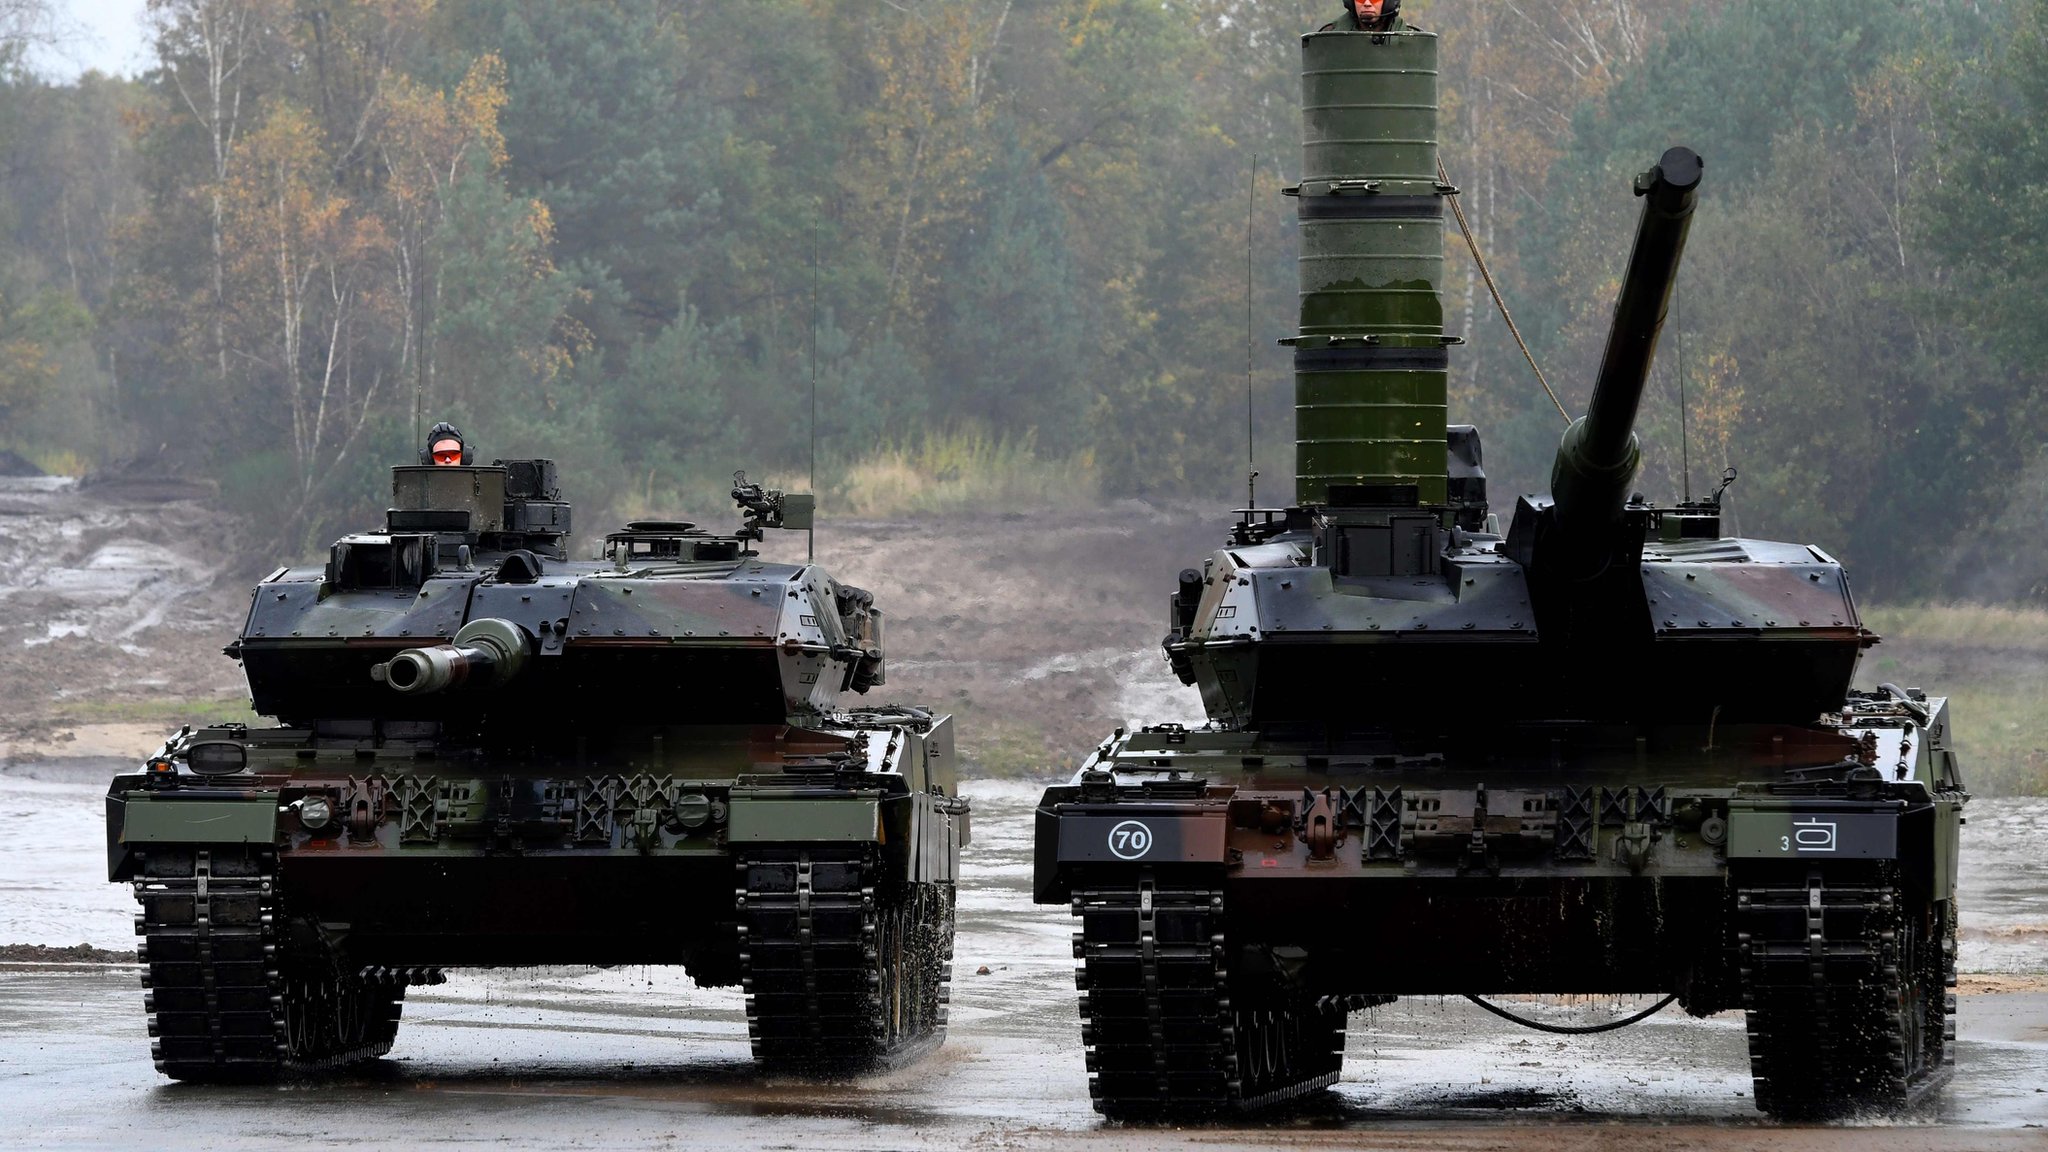 German army problems dramatically bad, report says